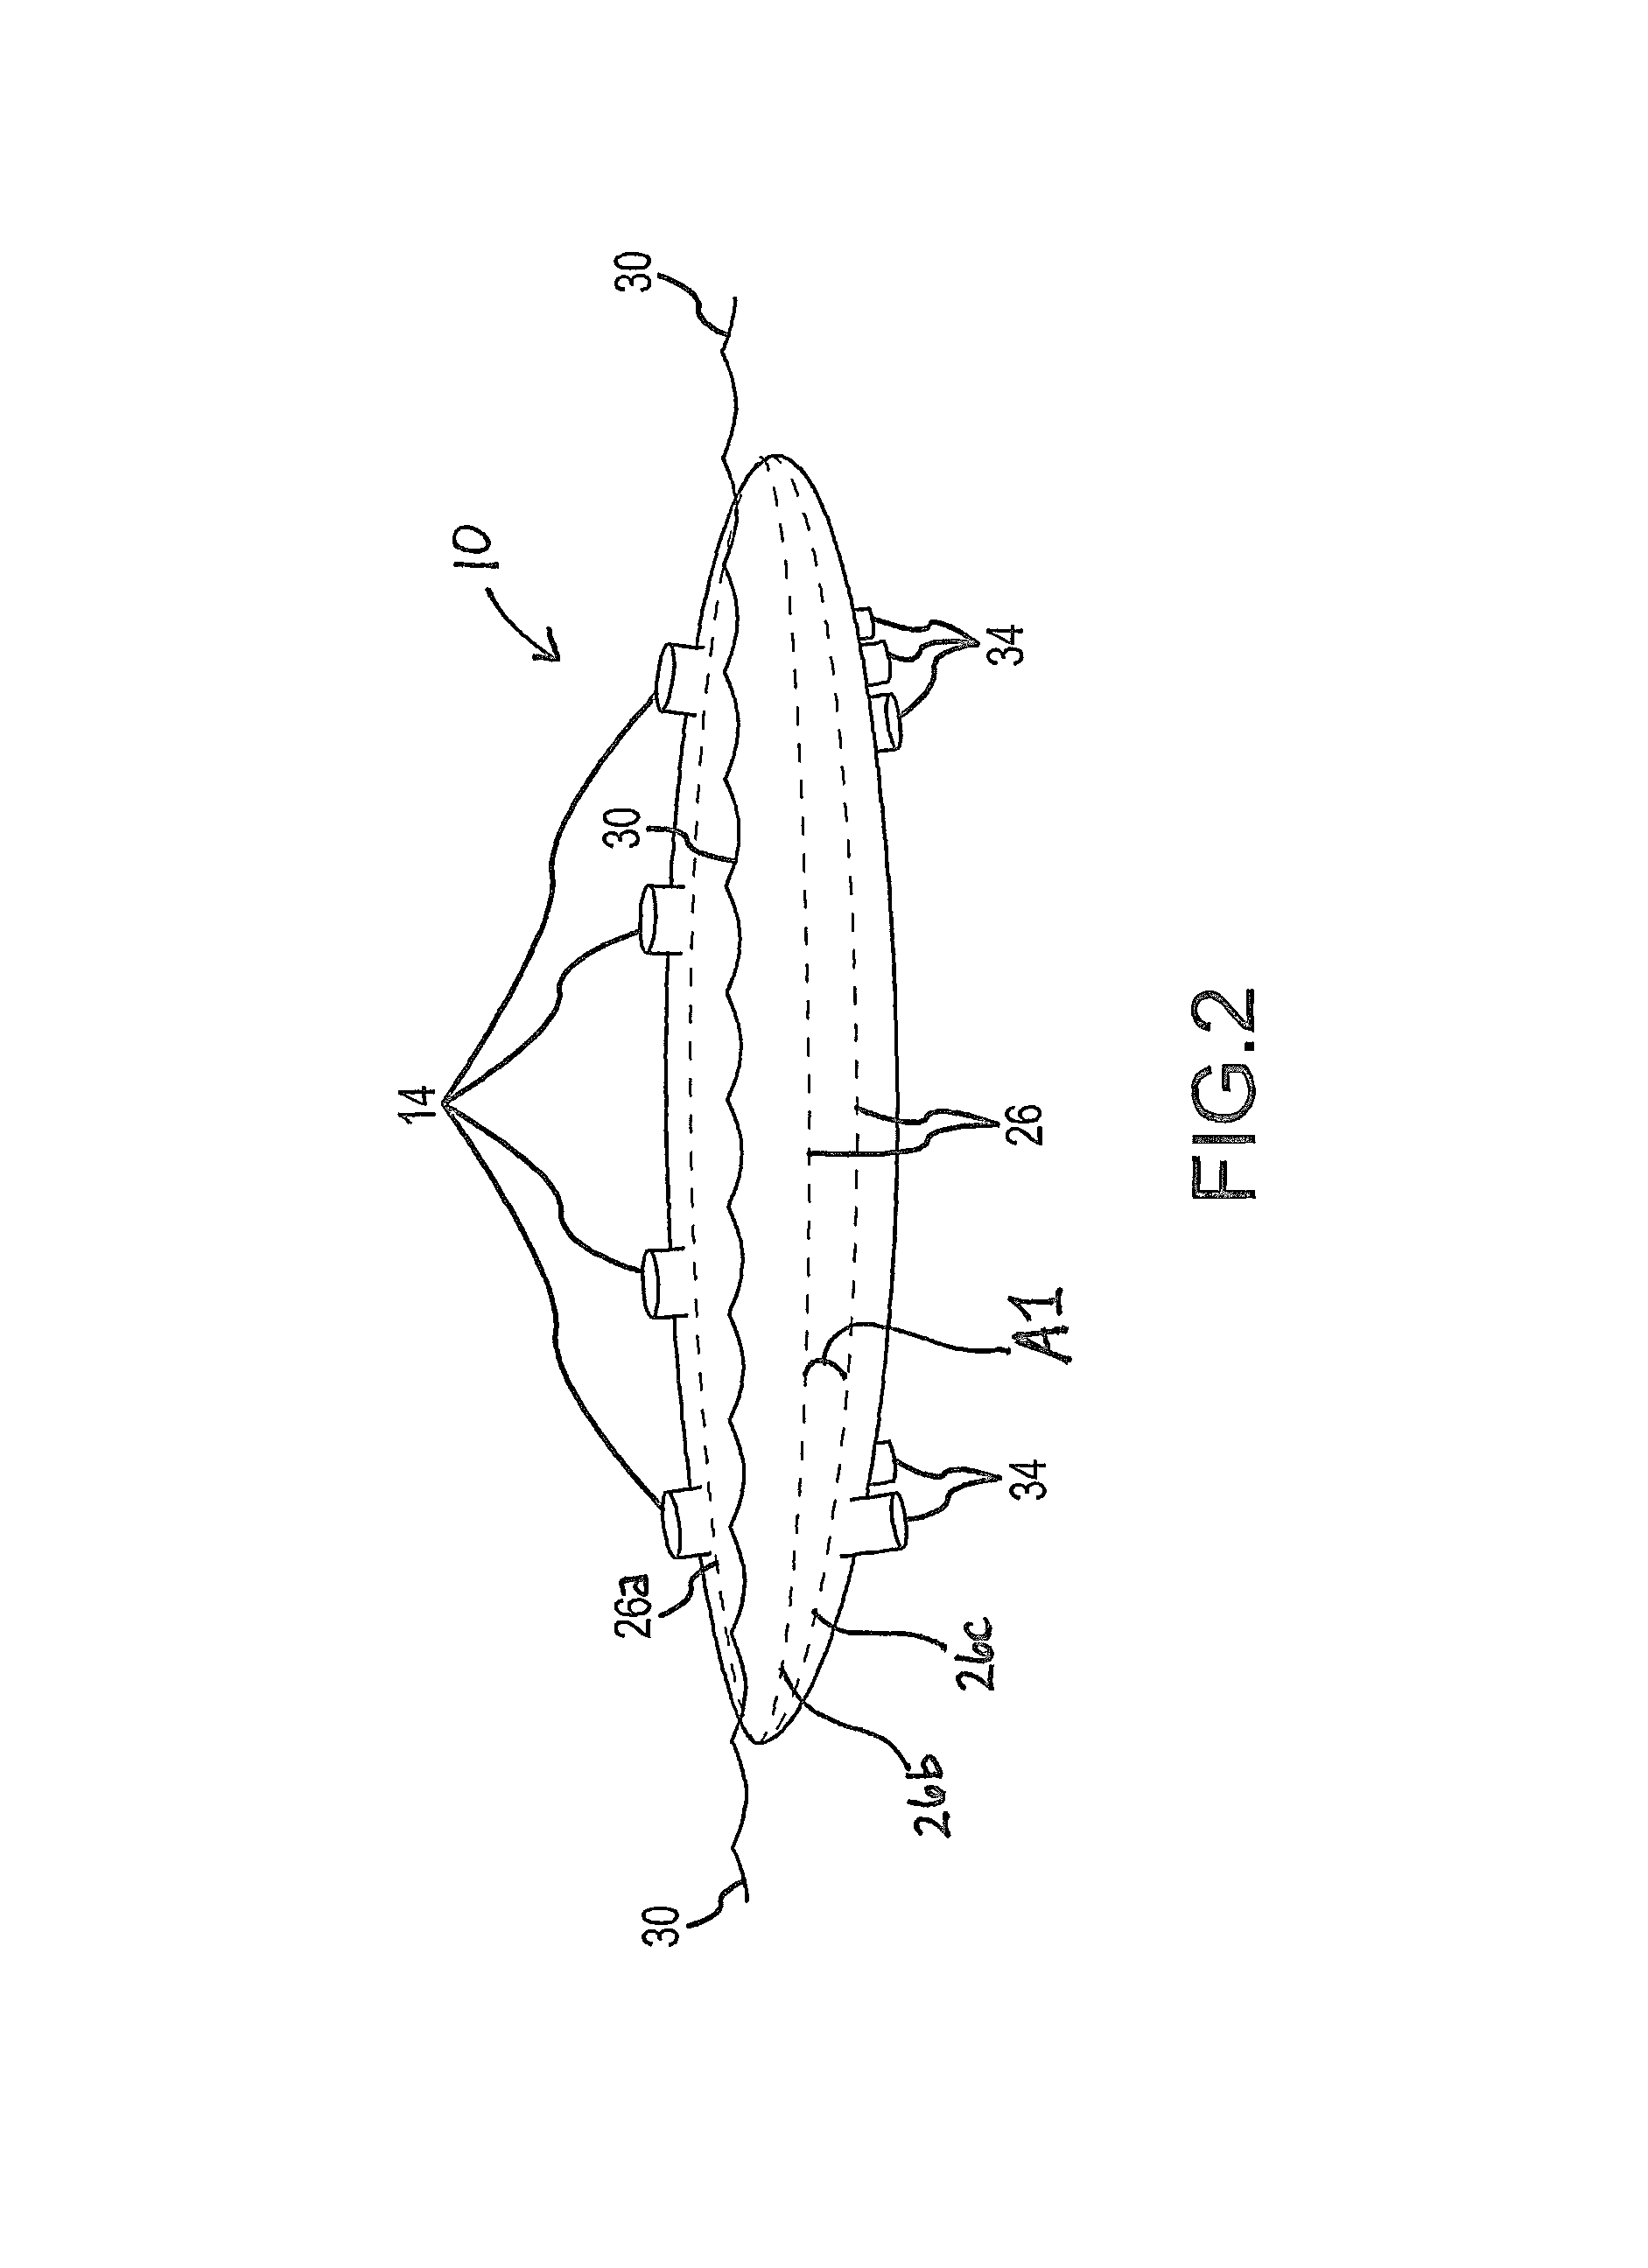 Method and system for a towed vessel suitable for transporting liquids